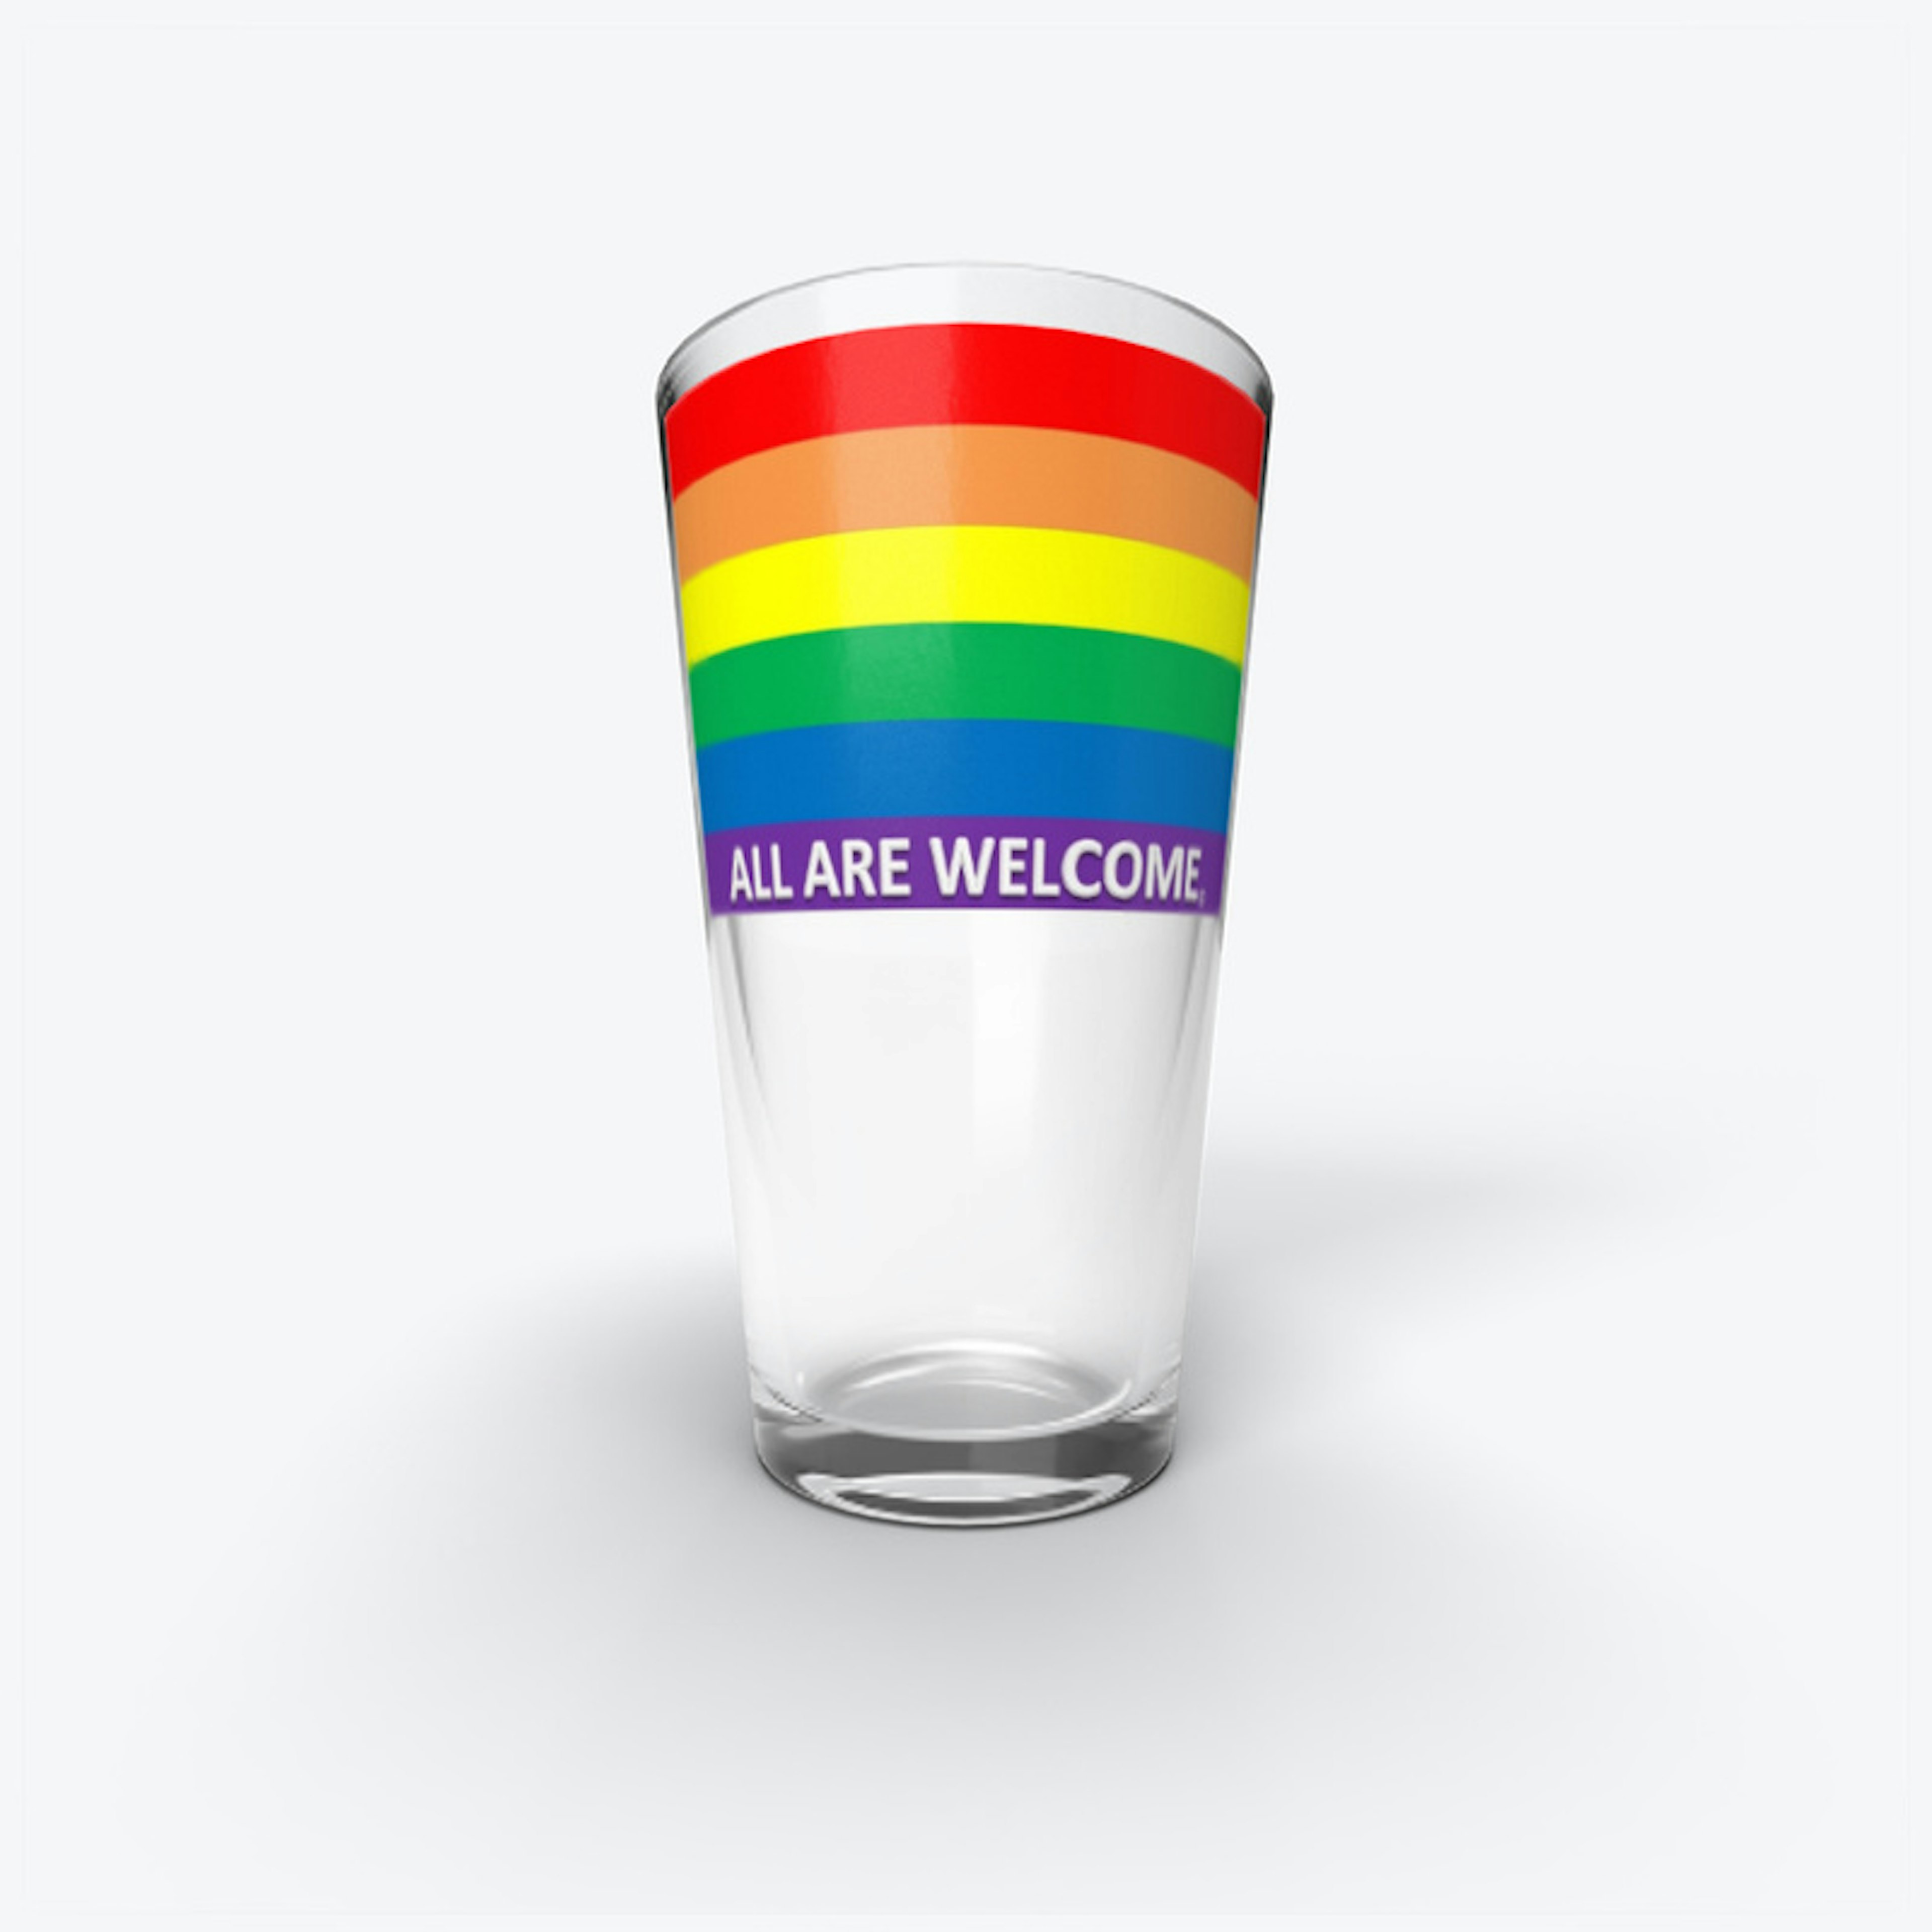 All Welcomed LGBT Inclusivity Diversity